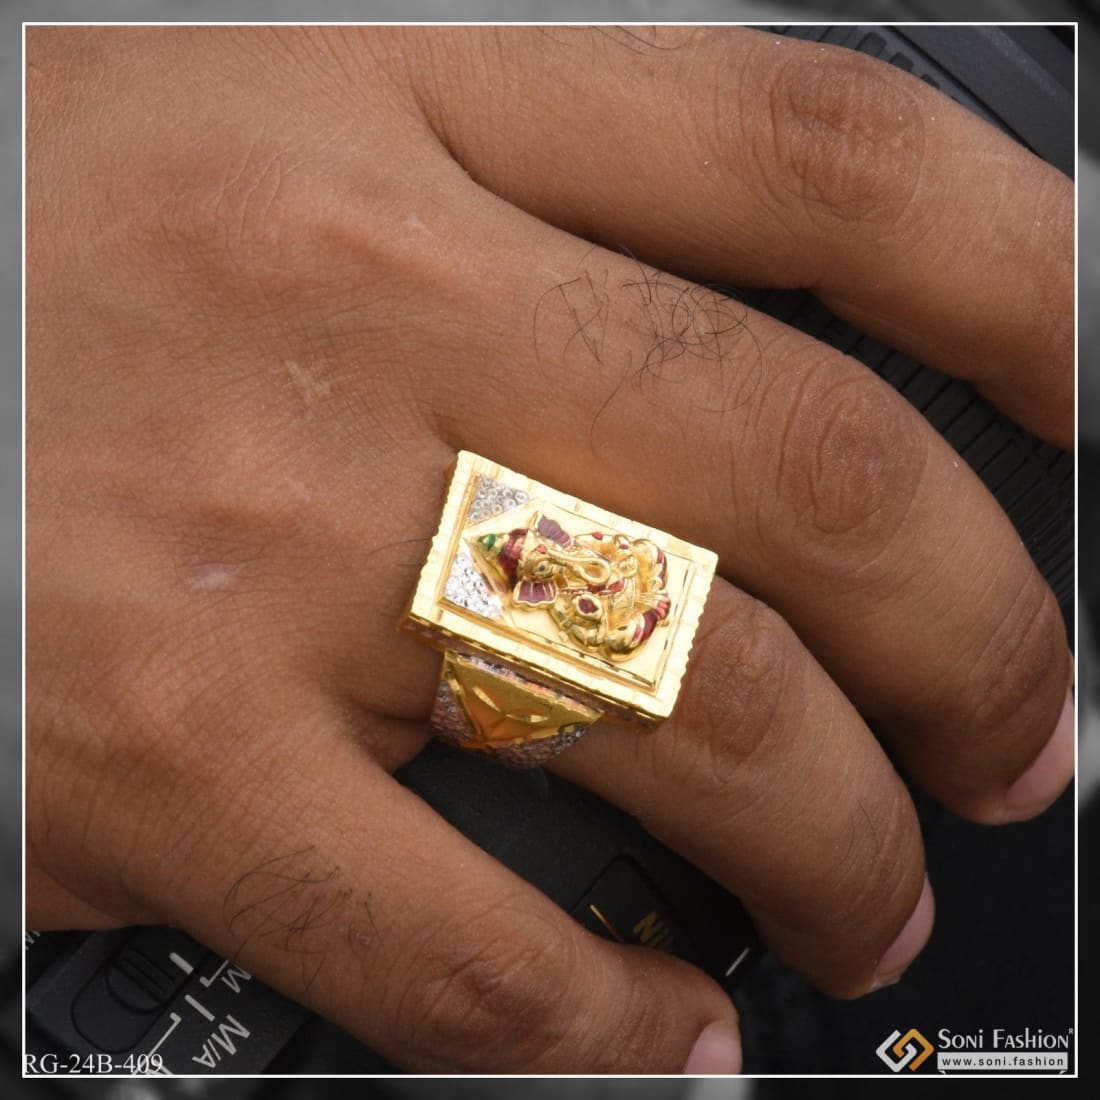 Gold Rings for Men | Gold rings fashion, Mens gold jewelry, Mens gold rings